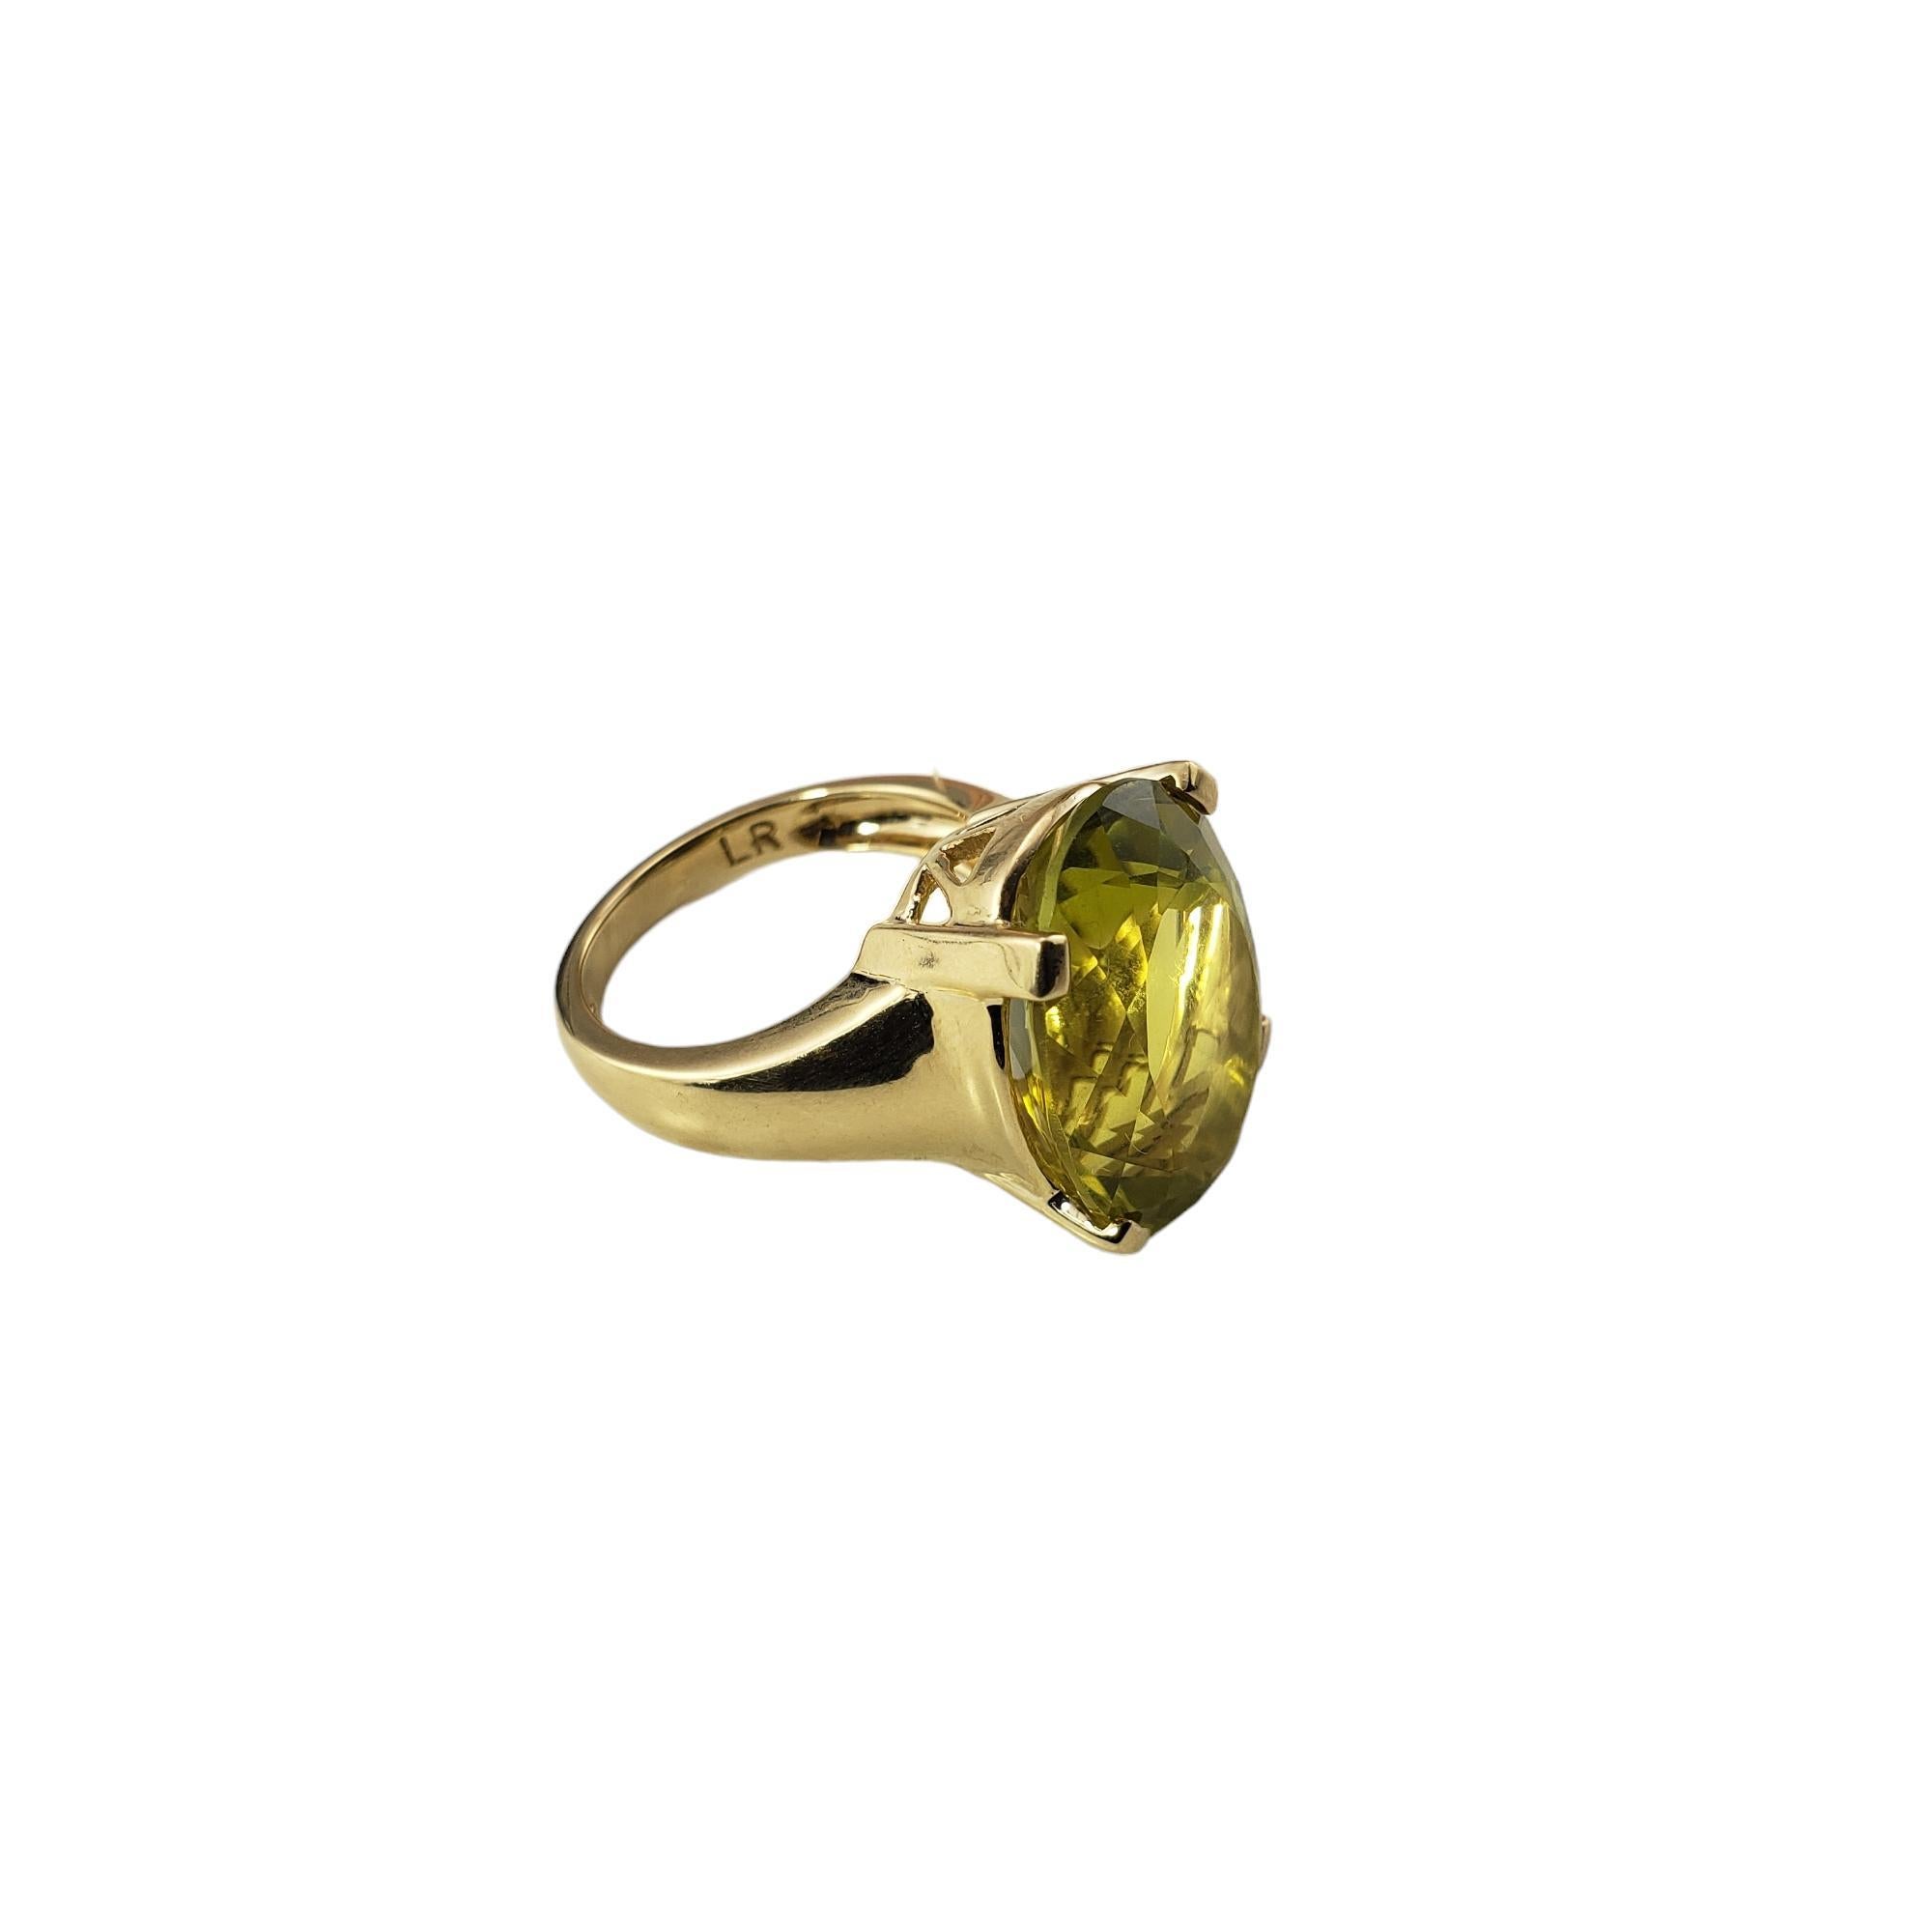 10K Yellow Gold Lemon Quartz Ring Size 8 #15789 In Good Condition For Sale In Washington Depot, CT